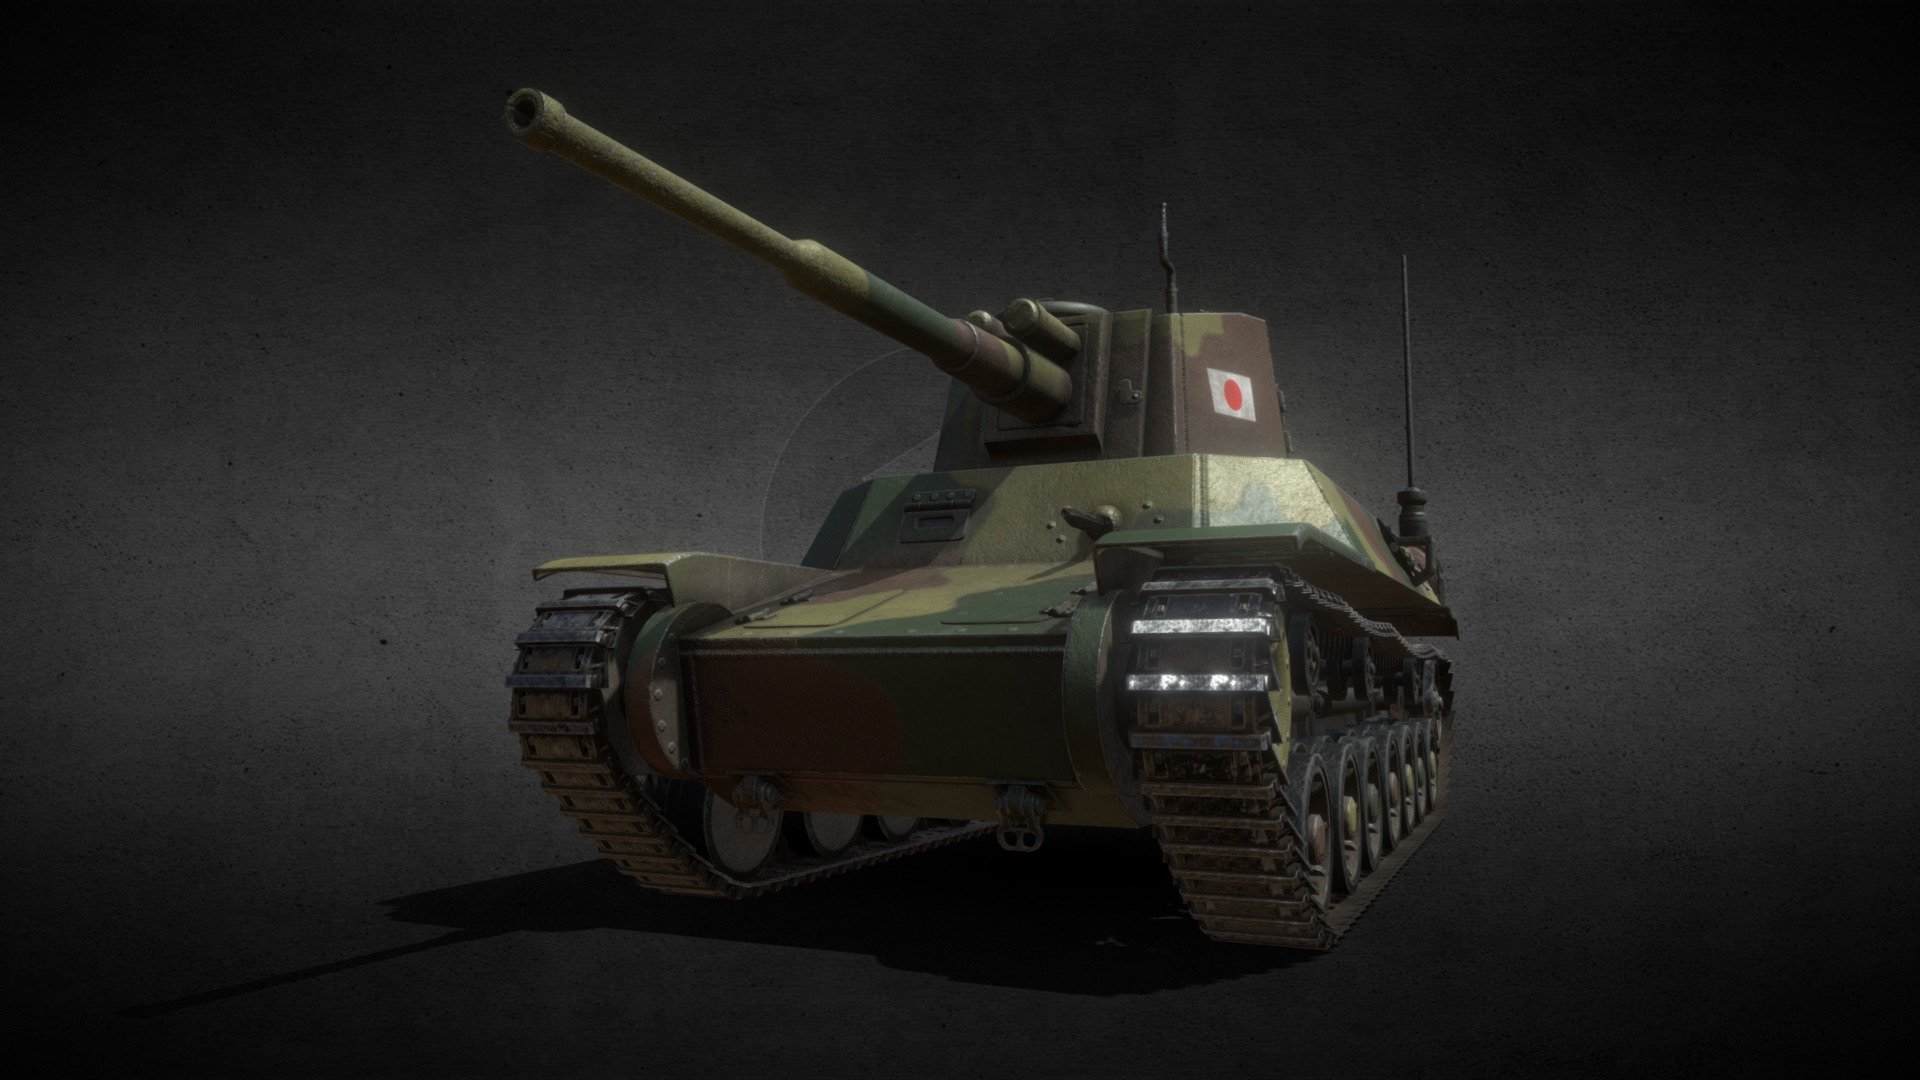 Ready to use Type 4 Chi-To 3d model

Type 4 Chi-To was one of the last medium tanks developed by the Imperial Japanese Army near the end of the WW2.
It was intended to be the succesor of the Type 97 Shinhoto Chi-Ha medium tank (3D model also avalible).
Due to the industrial and material shortages, only a few chassis were build and only 2 units were completed neither of which saw combat.
It was the most advanced World War II era Japanese tank to reach the production stage.

Tri-color camouflage variant.

Ready to use in games or renders.

More Japanese WW II models in the collection: https://skfb.ly/oyoDN

More Tanks and Parts models in the collection: https://skfb.ly/oyoDV

More cheap or free military models in the collection: https://skfb.ly/ooYNo

4096x4096 textures:


albedo
roughness
metalness
normal map
ambient occulusion map

modelled in Blender textured in Adobe Substance 3D Painter - Type 4 Chi-To (IJA Medium Tank) - Buy Royalty Free 3D model by AdamKozakGrafika 3d model